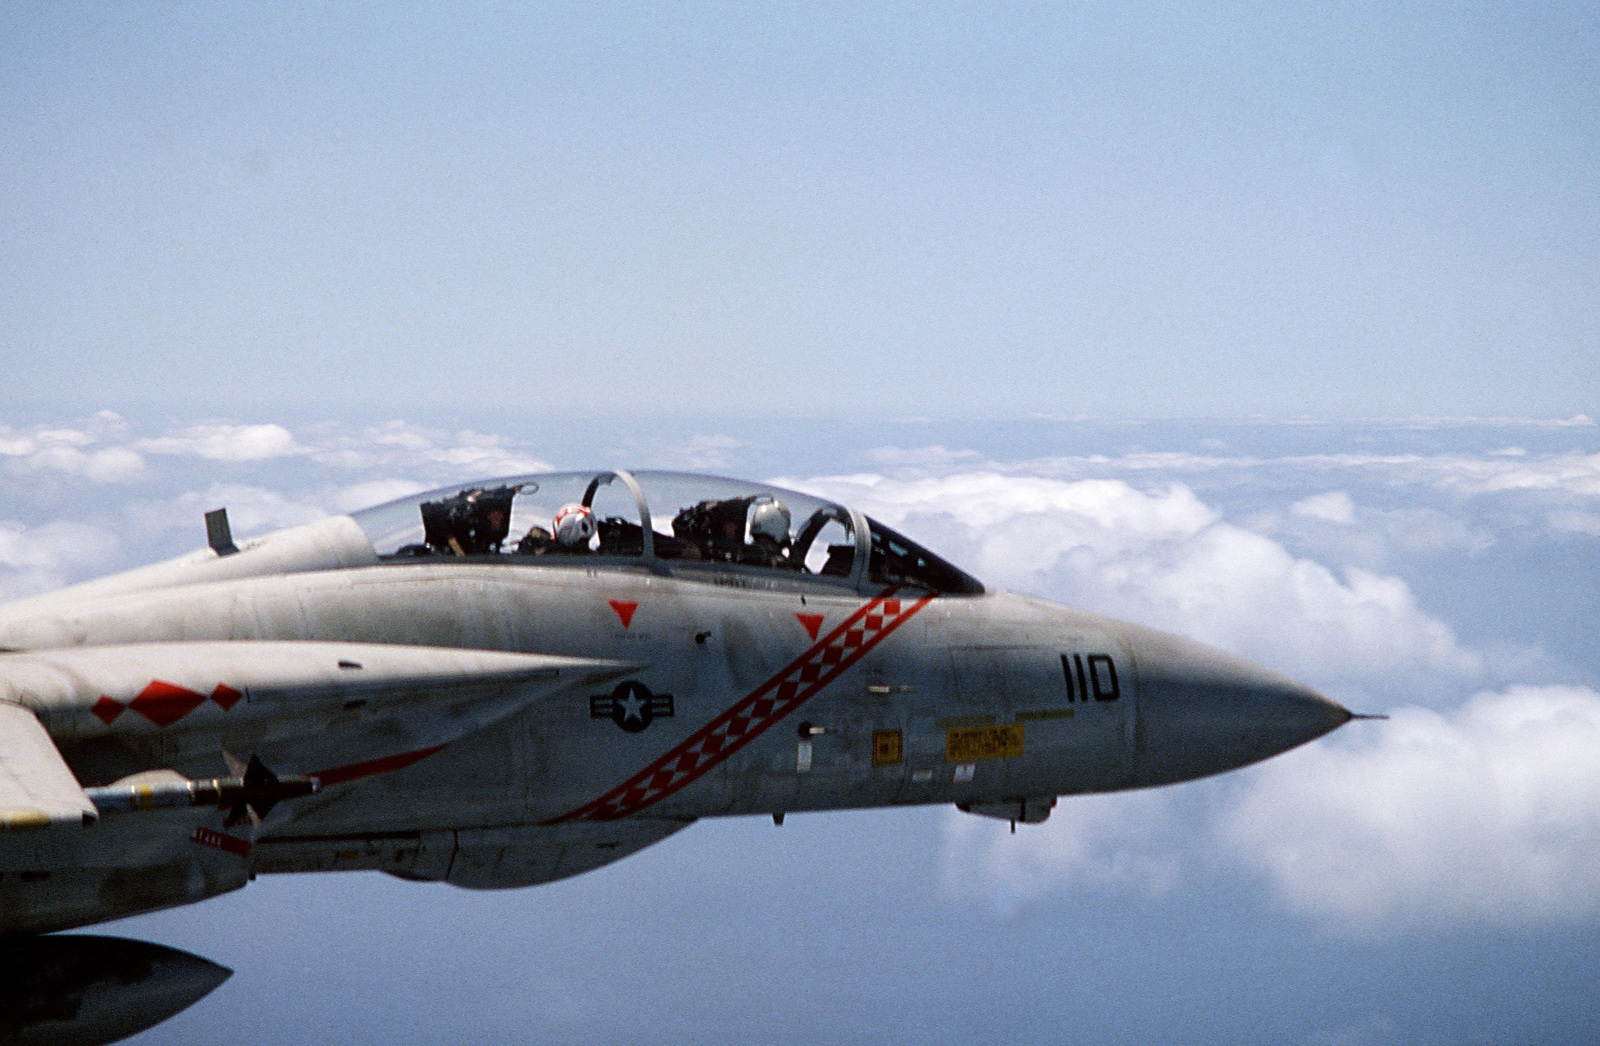 an-air-to-air-right-side-view-of-the-nose-section-of-an-f-14-tomcat-aircraft-c2cbc5-1600.jpg